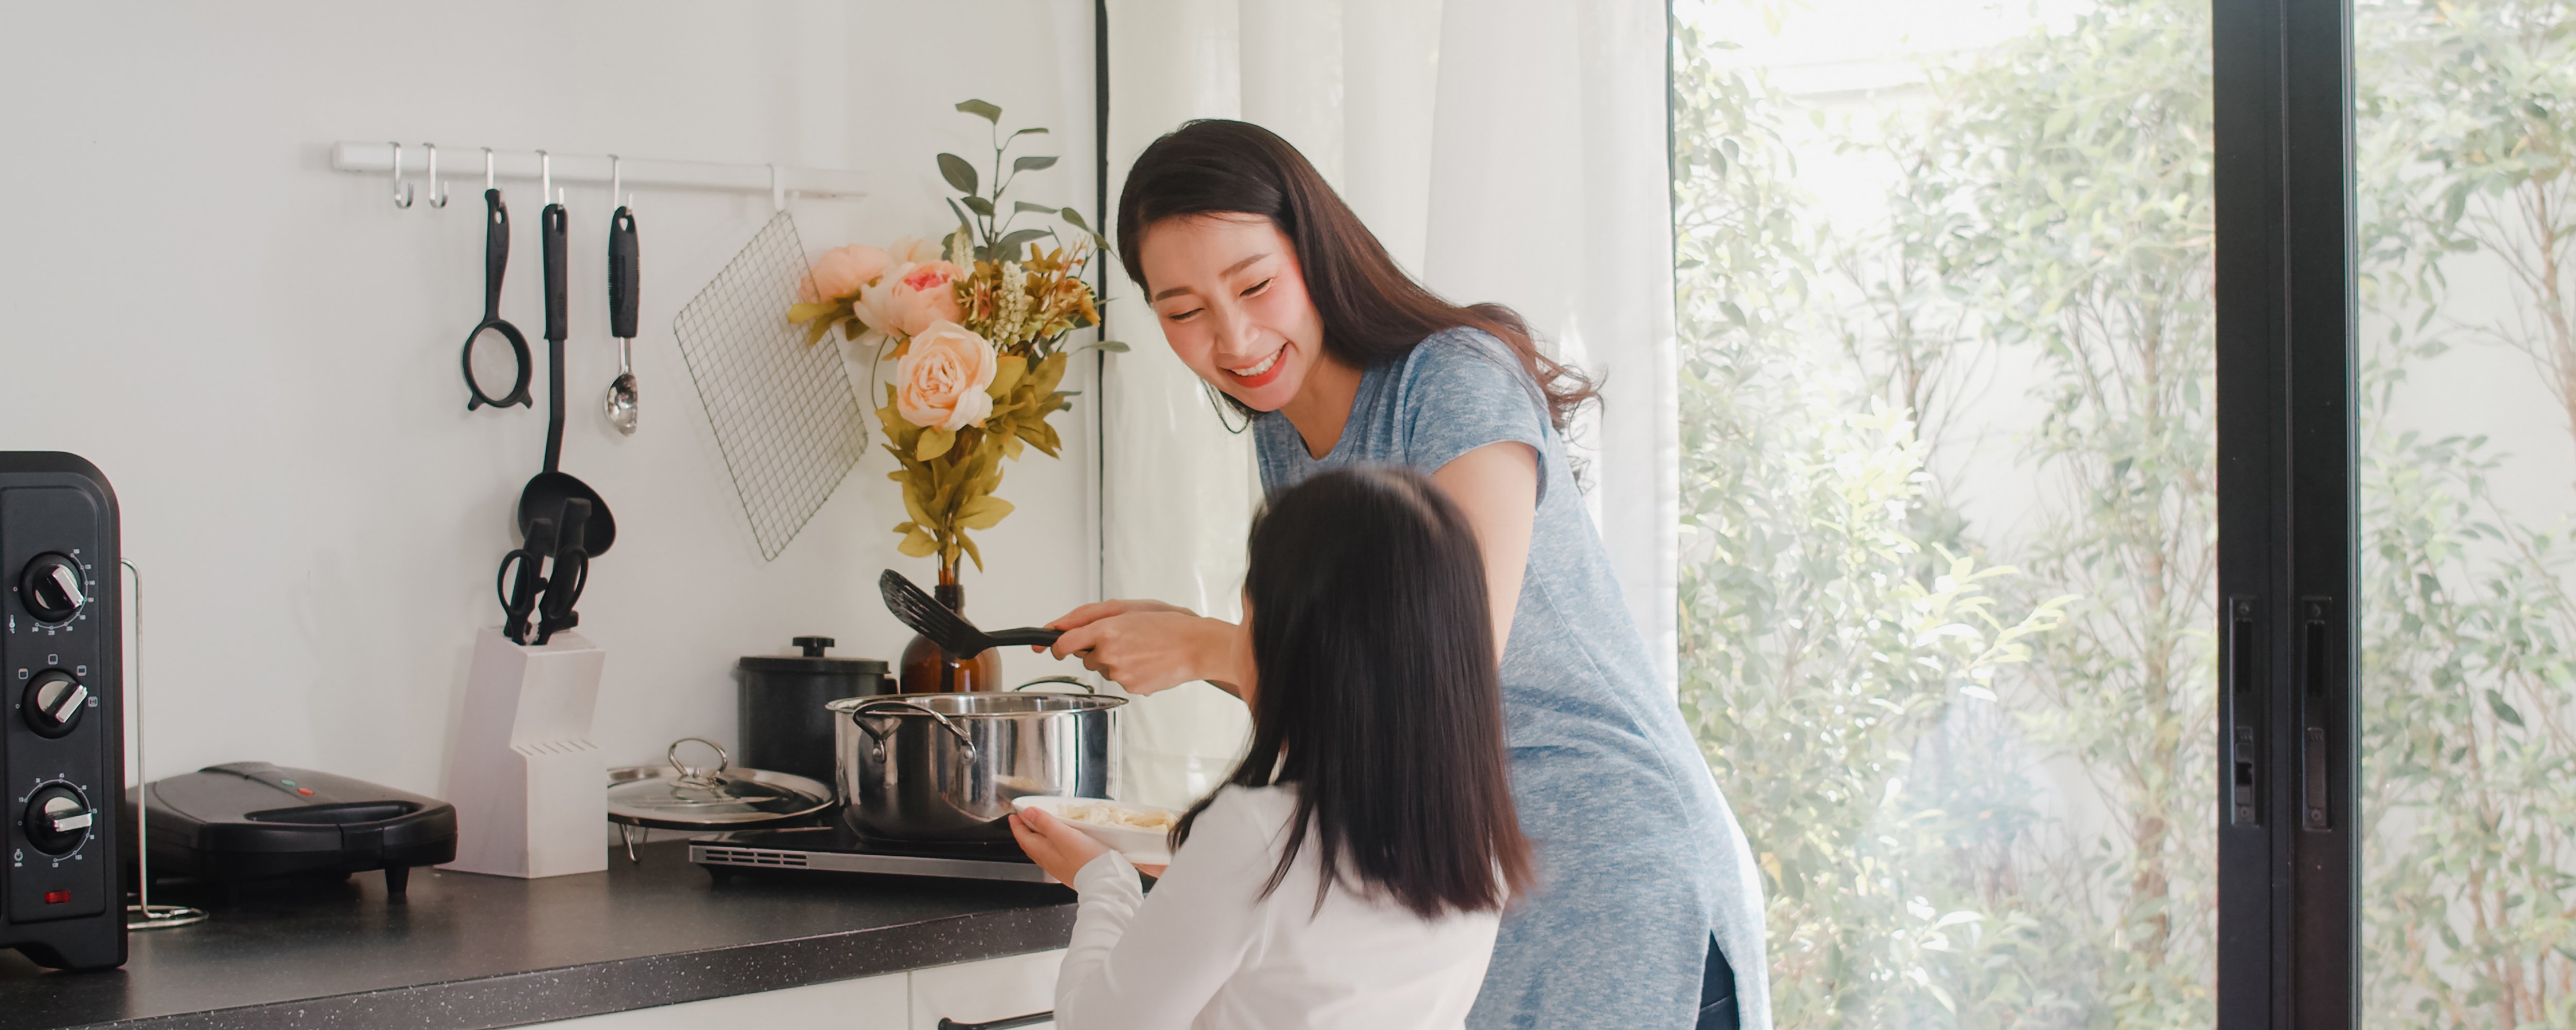 young-asian-japanese-mom-daughter-cooking-home-lifestyle-women-happy-making-pasta-spaghetti-together-breakfast-meal-modern-kitchen-house-morning-1